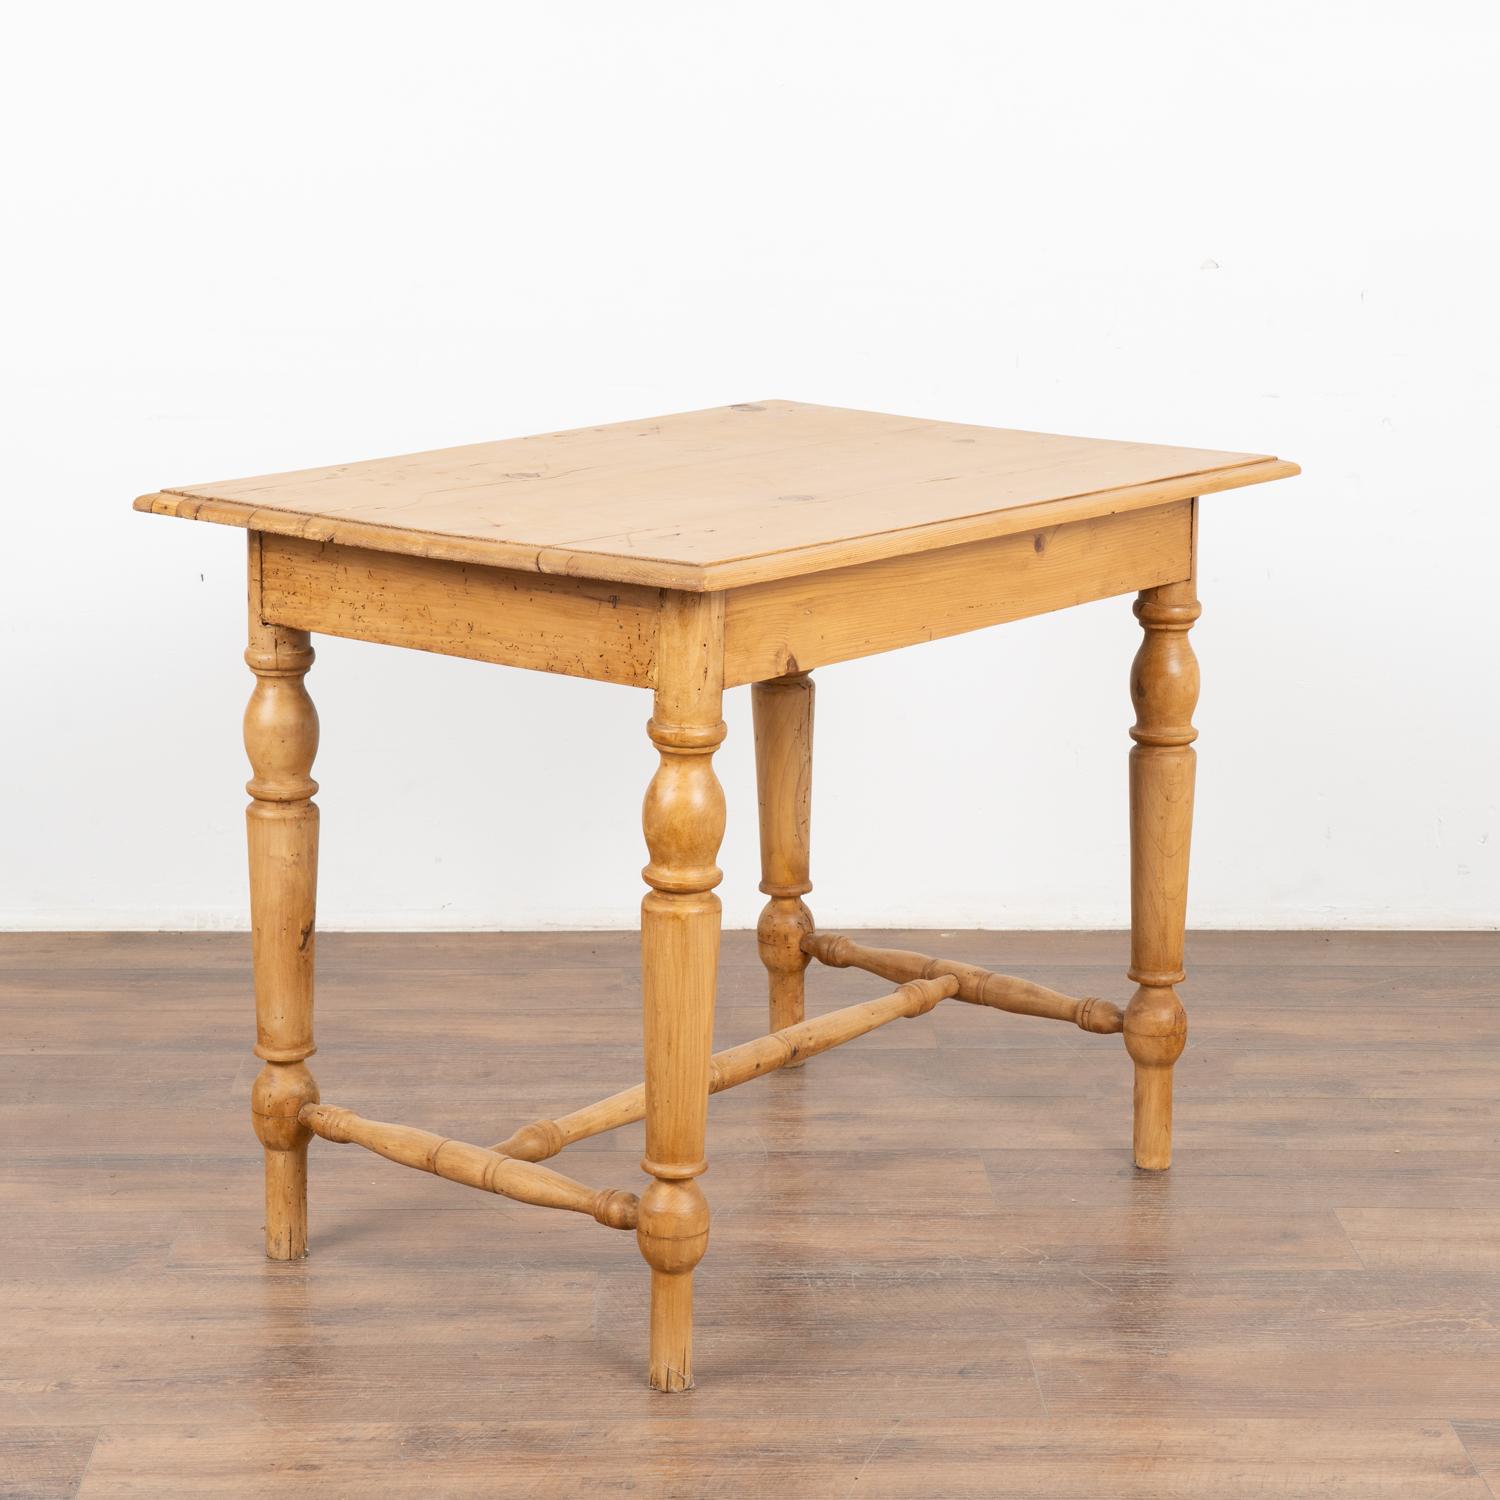 Pine Side Table With Turned Legs and Drawer, Denmark circa 1880-1900 For Sale 7